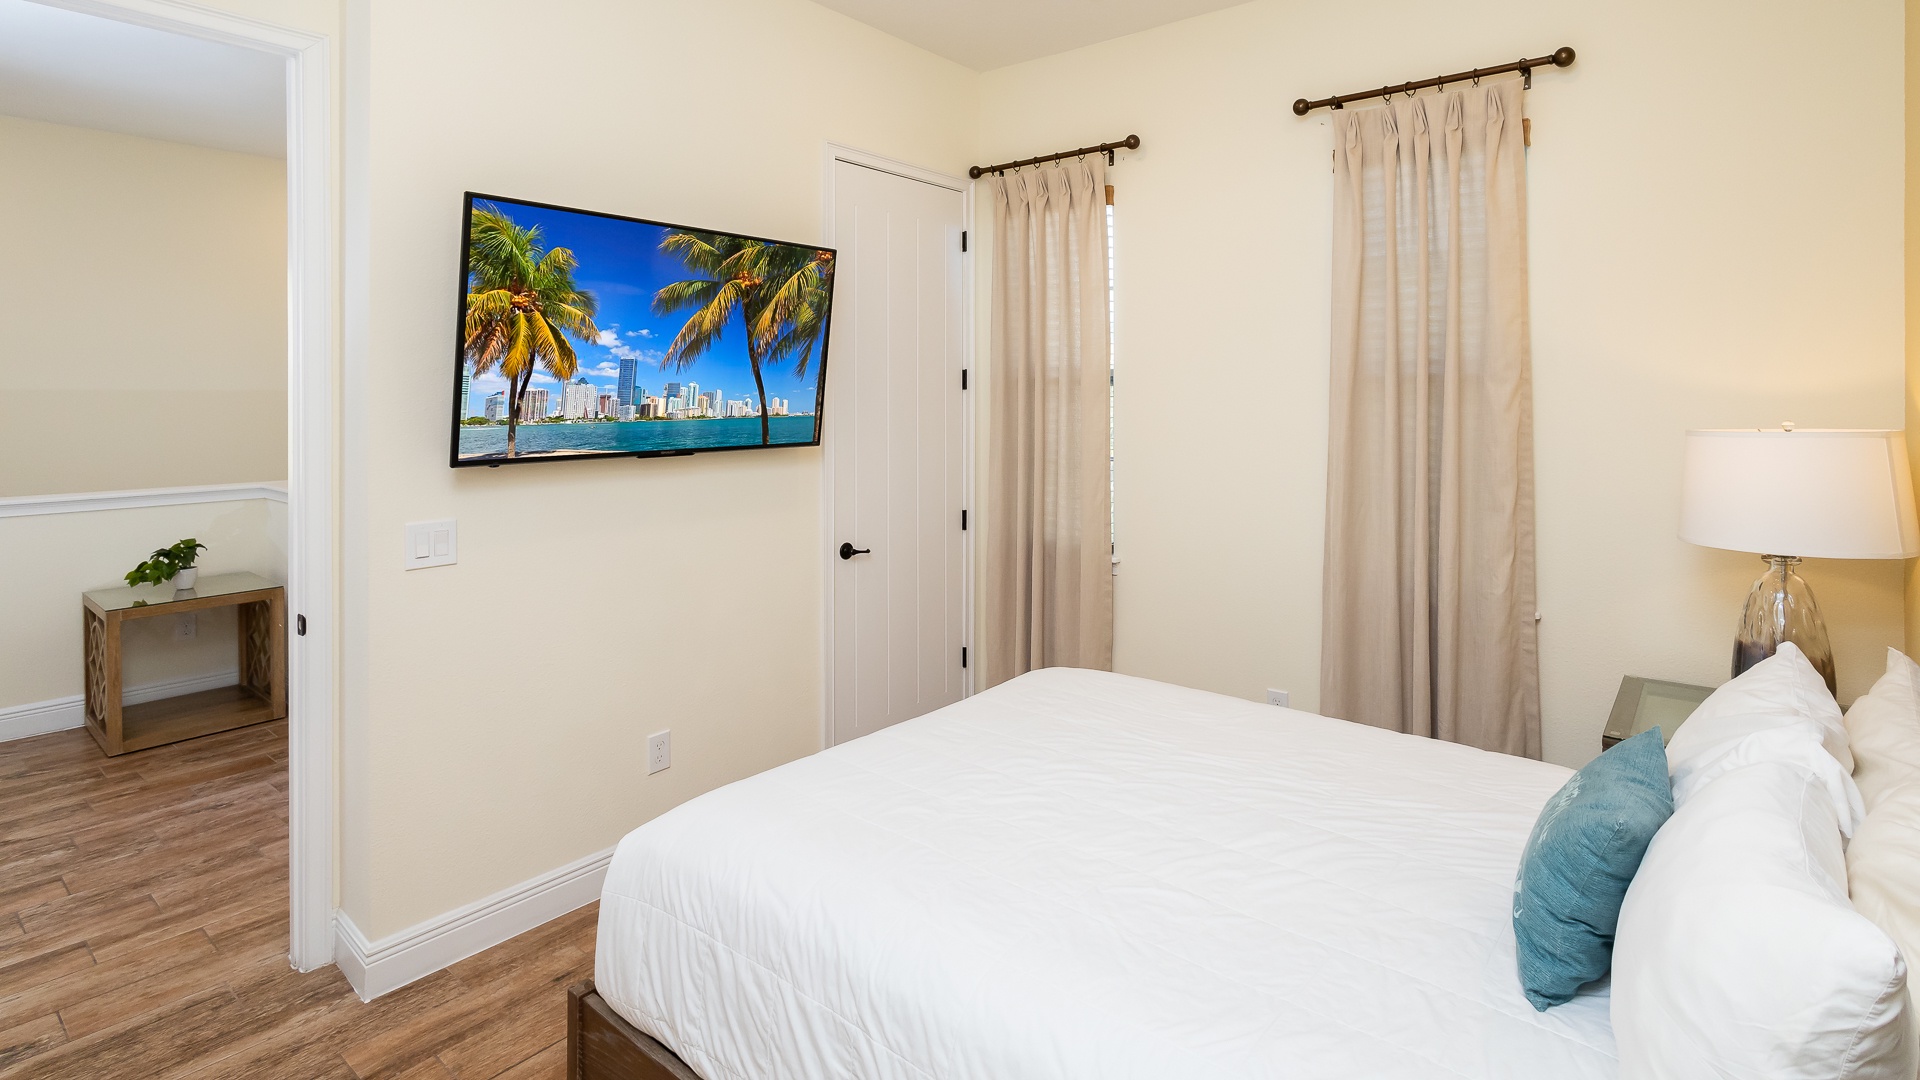 This serene second-floor full suite offers a private ensuite bath & Smart TV